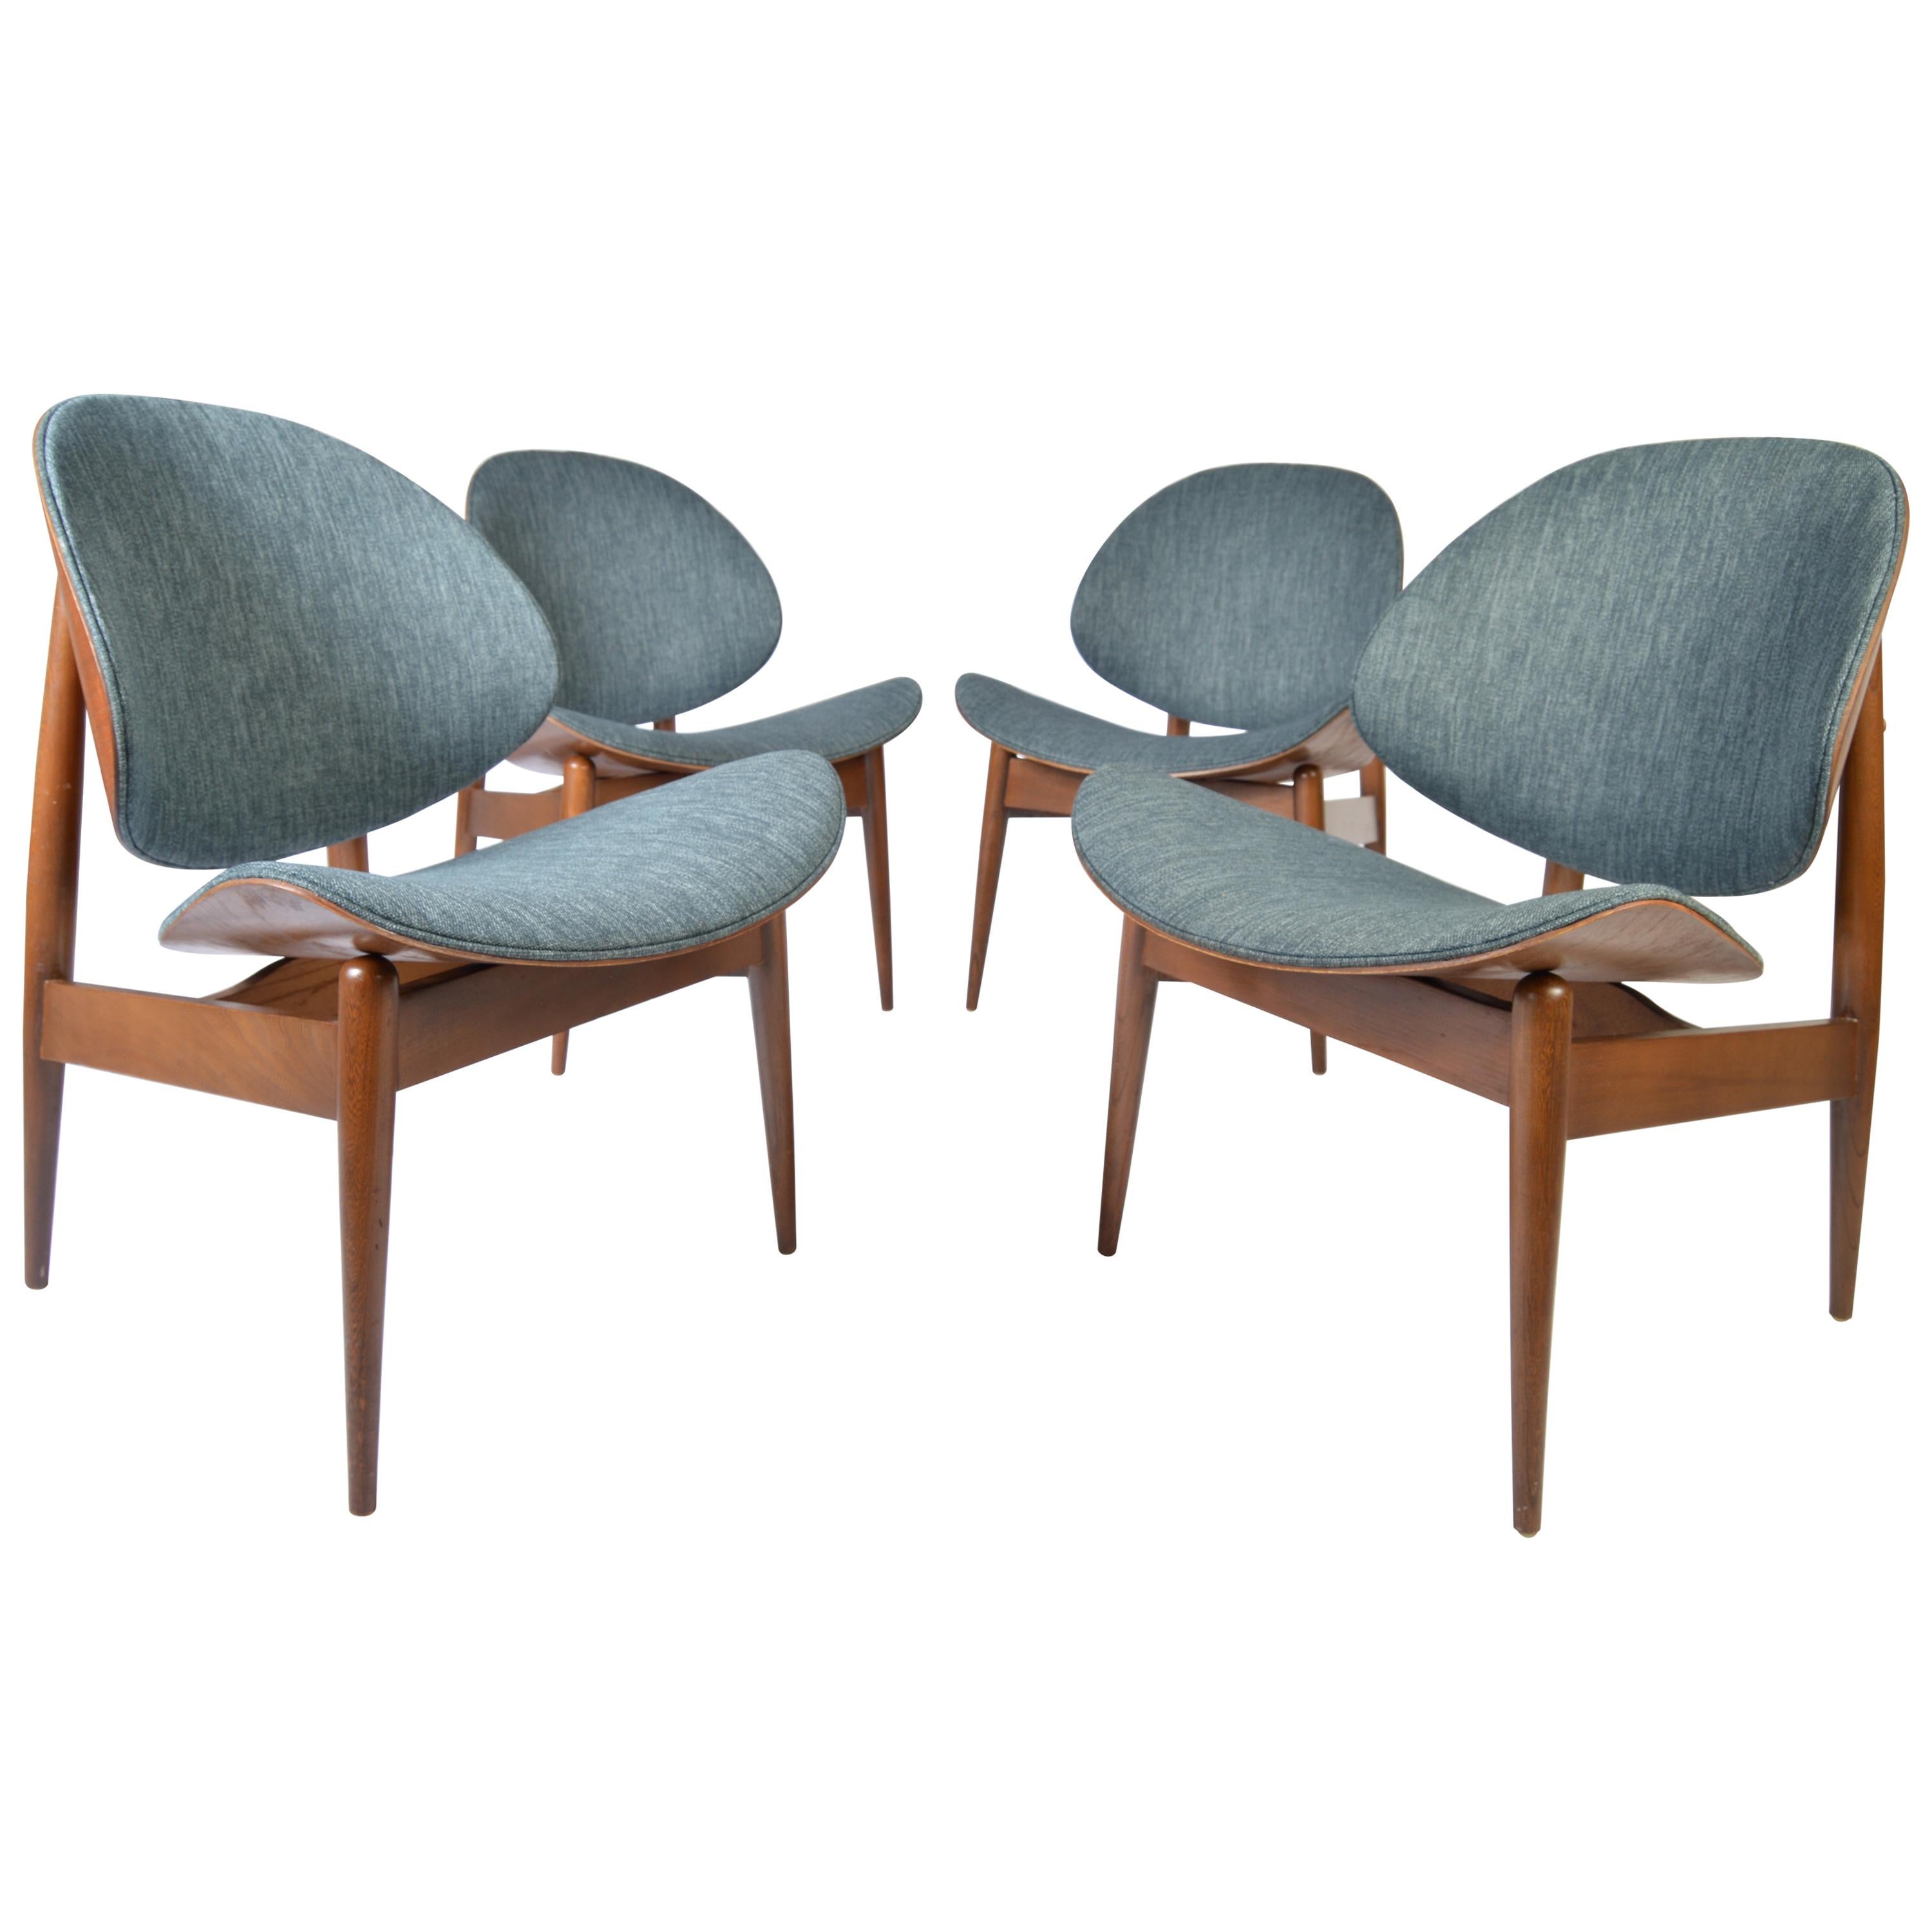 Four Kodawood Clam Shell Chairs by Seymour James Wiener